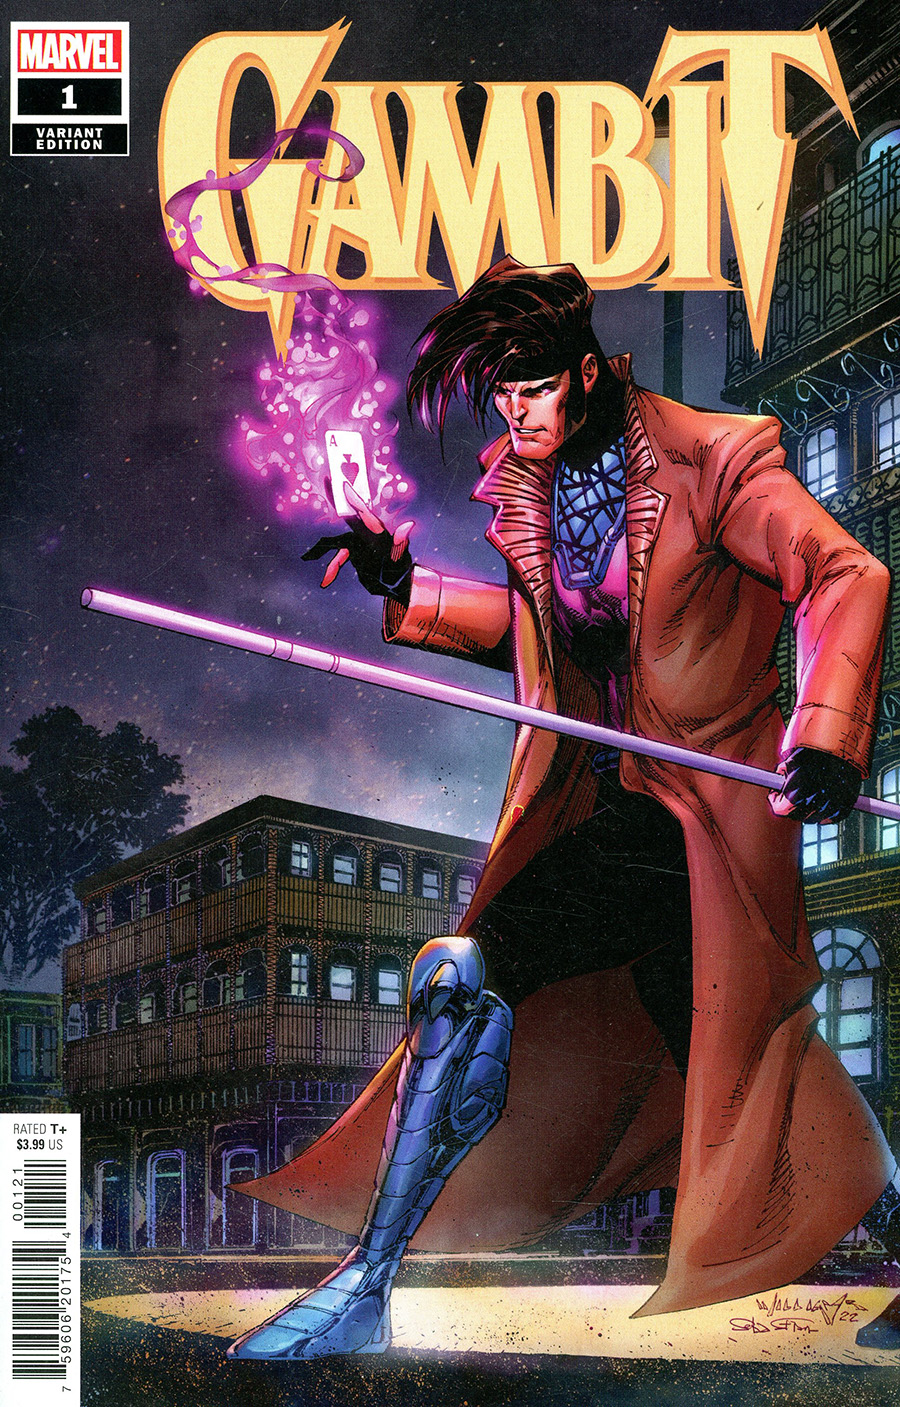 Gambit TP Vol 03 King Of Thieves